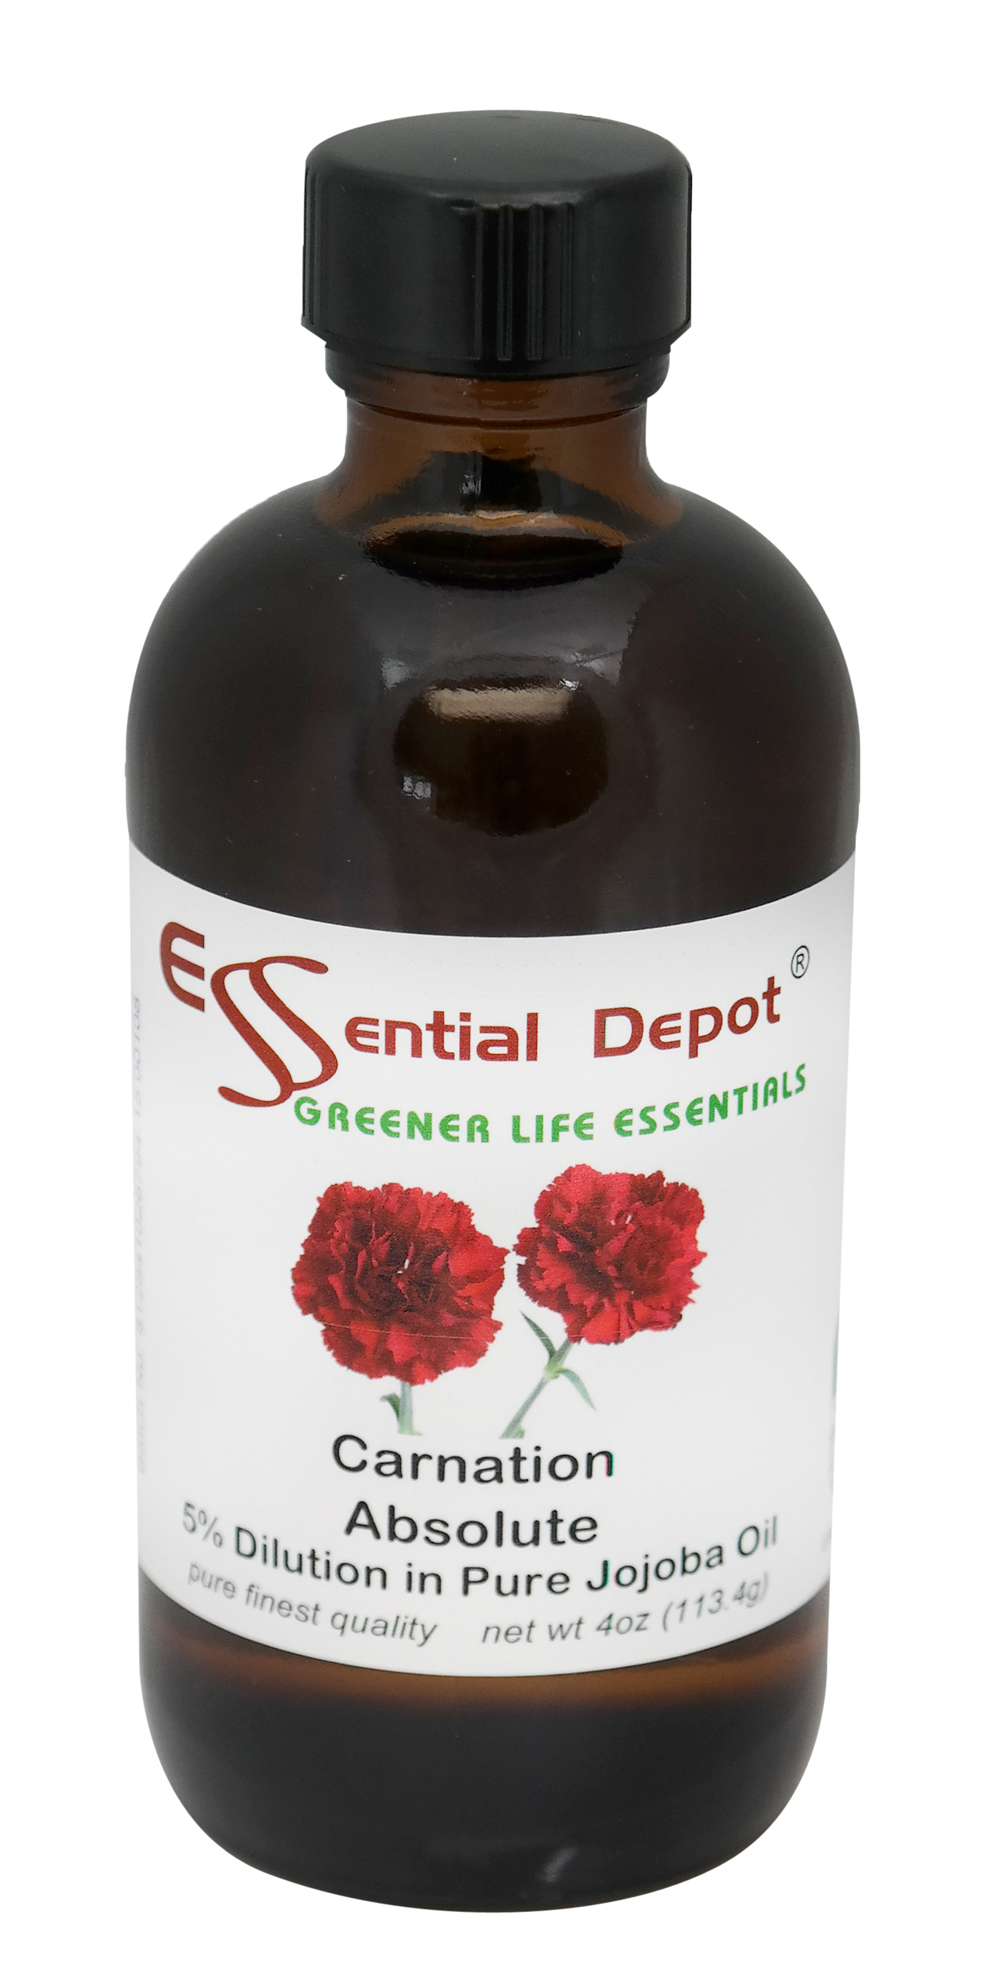 Carnation Absolute 5% Dilution in Pure Jojoba - 4oz